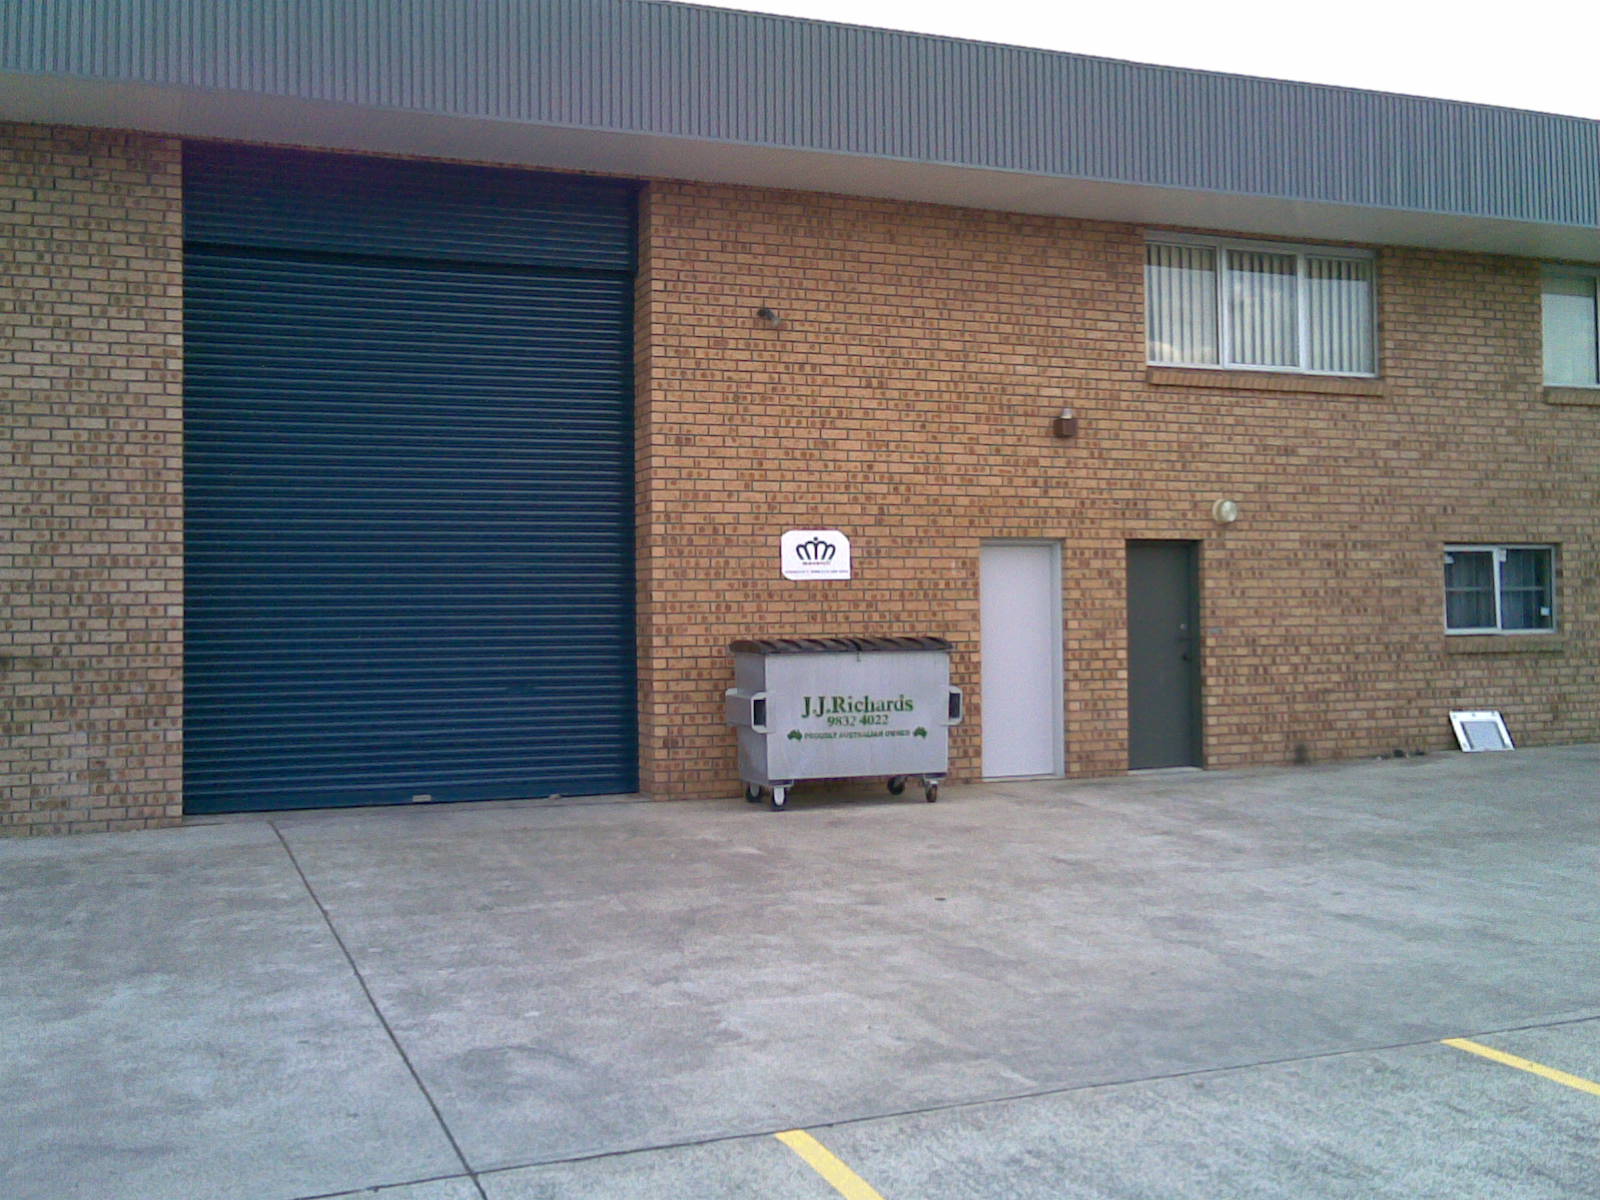 Industrial property for lease in seven hills 3